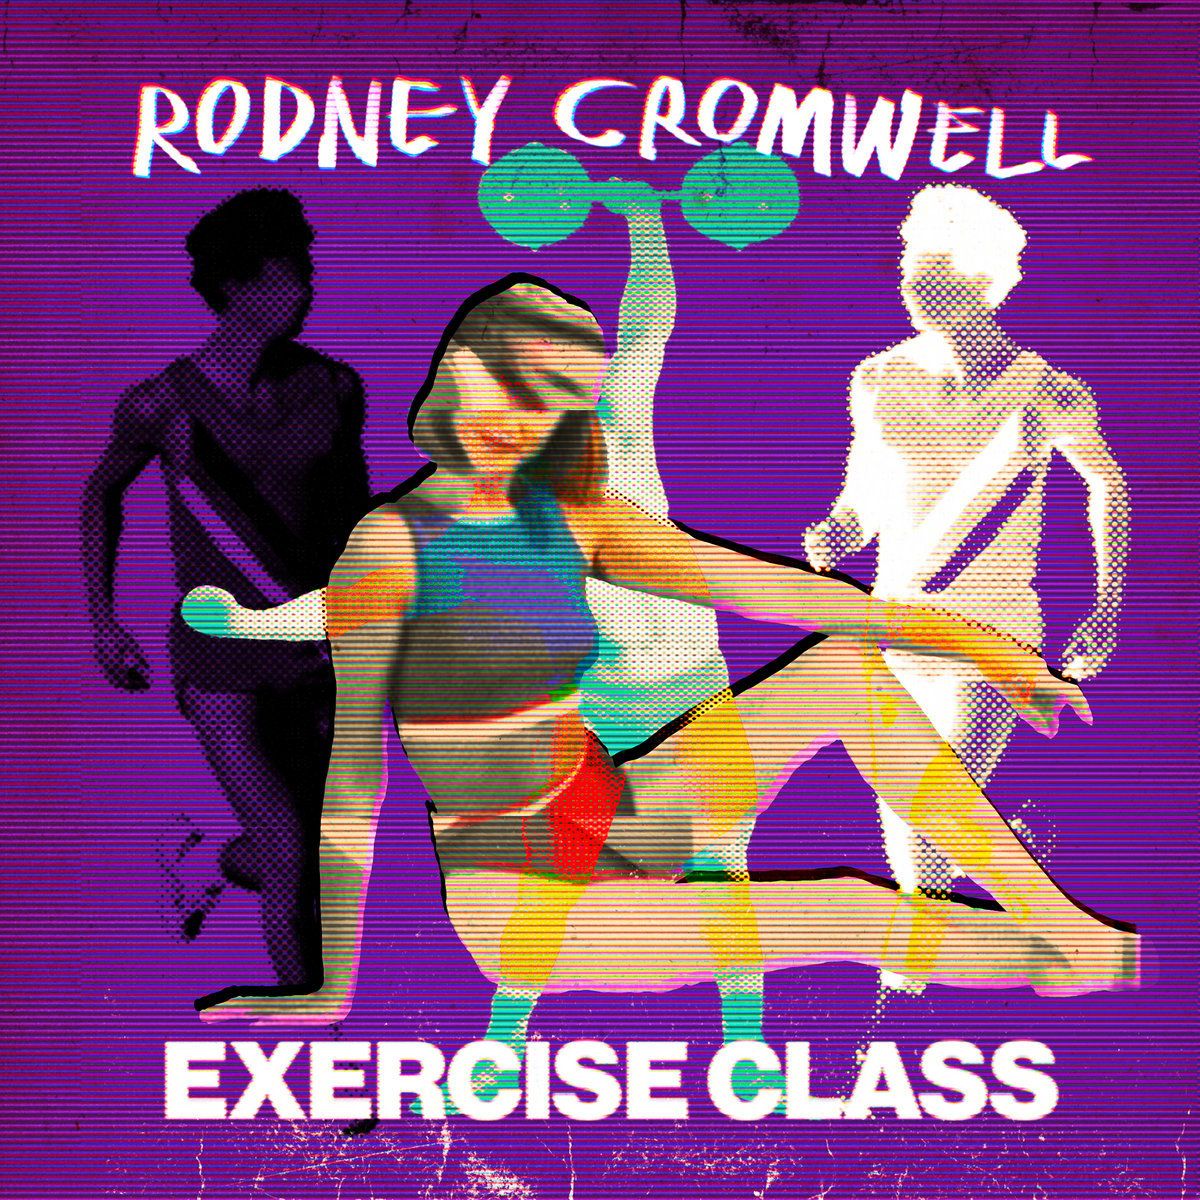 London-based Artist Rodney Cromwell Mixes Synth, Psychedelia, and Post-Punk in his “Exercise Class” EP